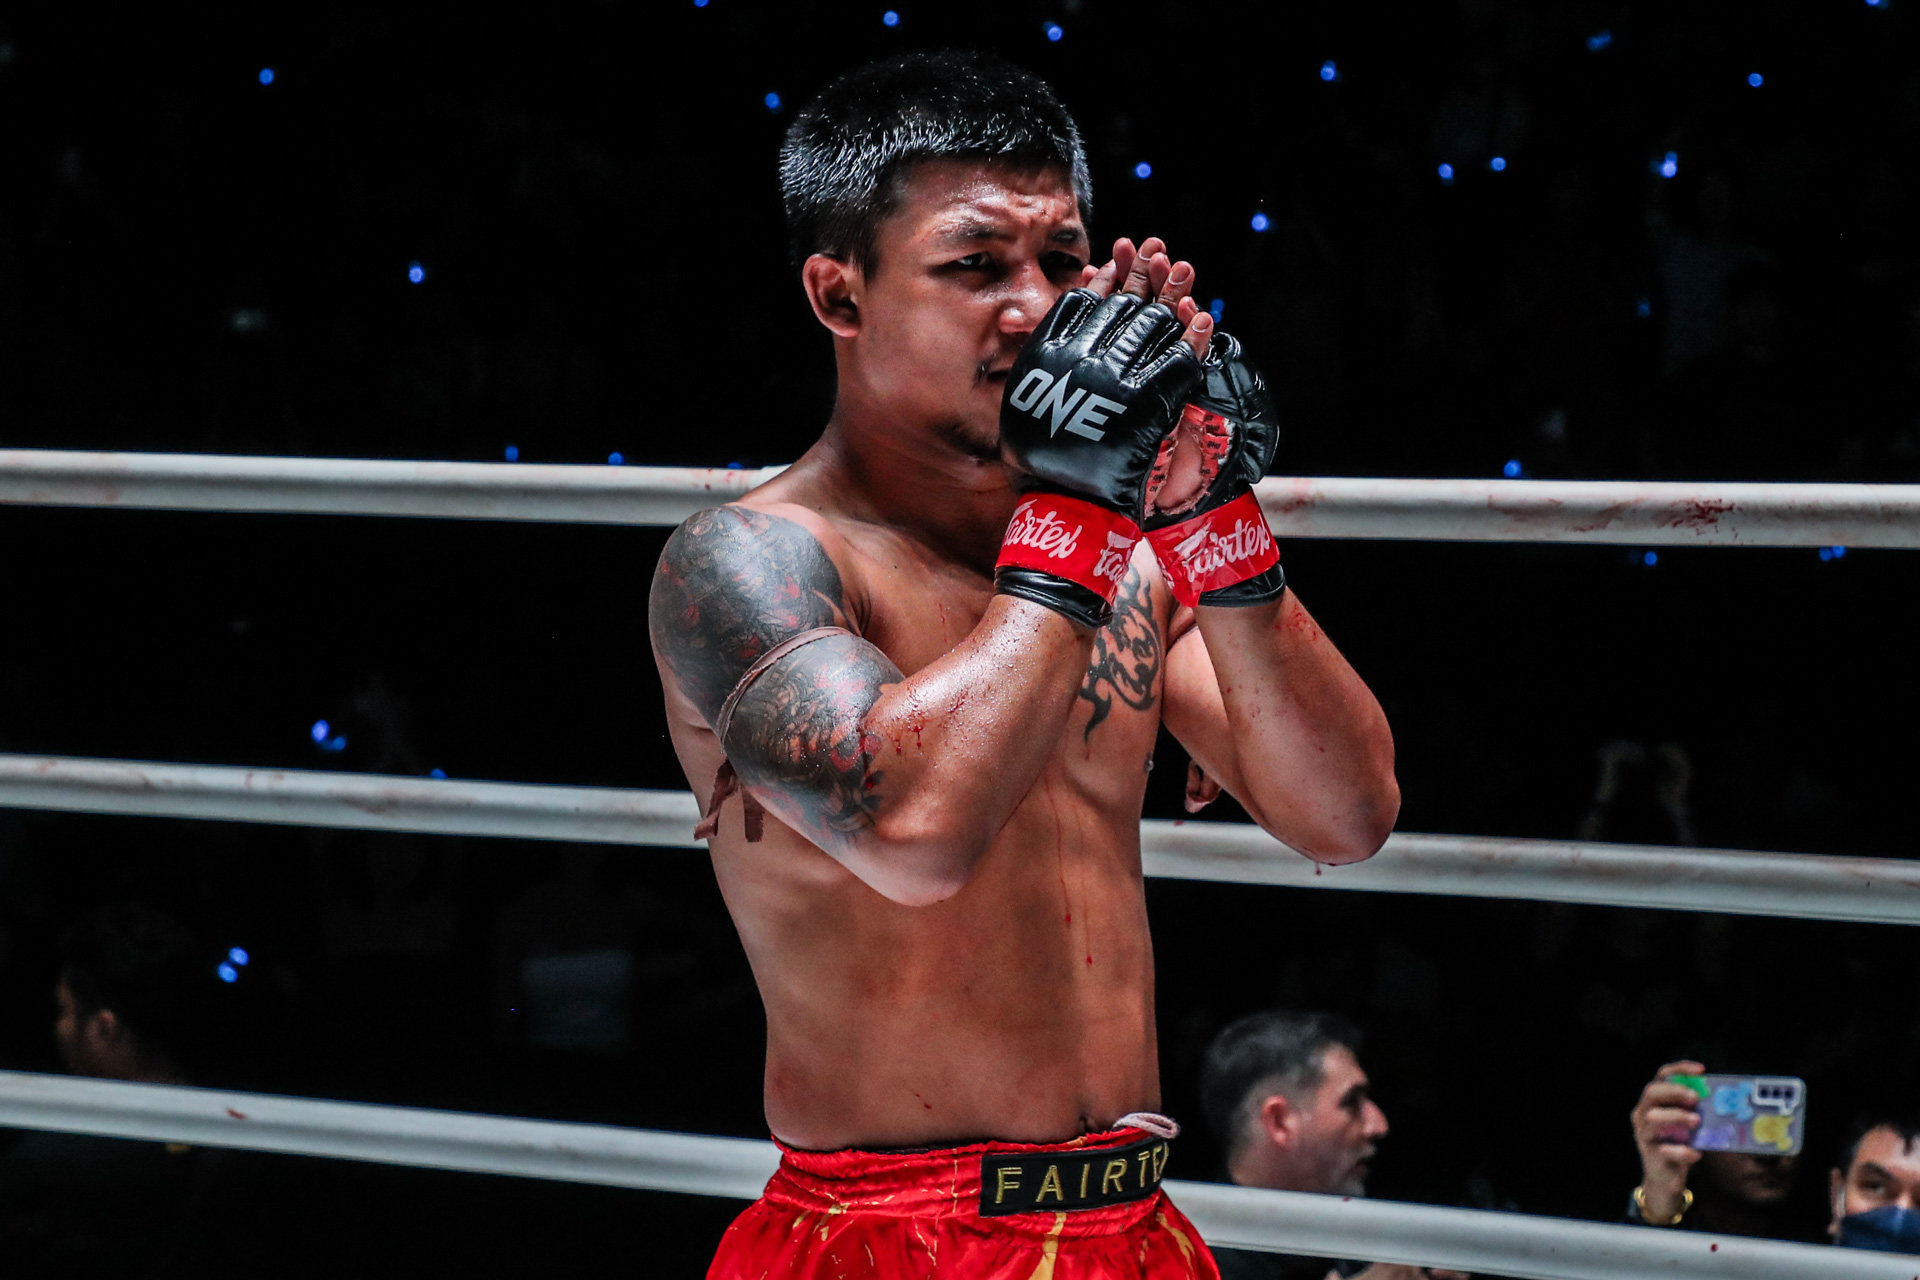 Rodtang Jitmuangnon thanks the crowd after his decision loss to Superlek. Photo: ONE Championship